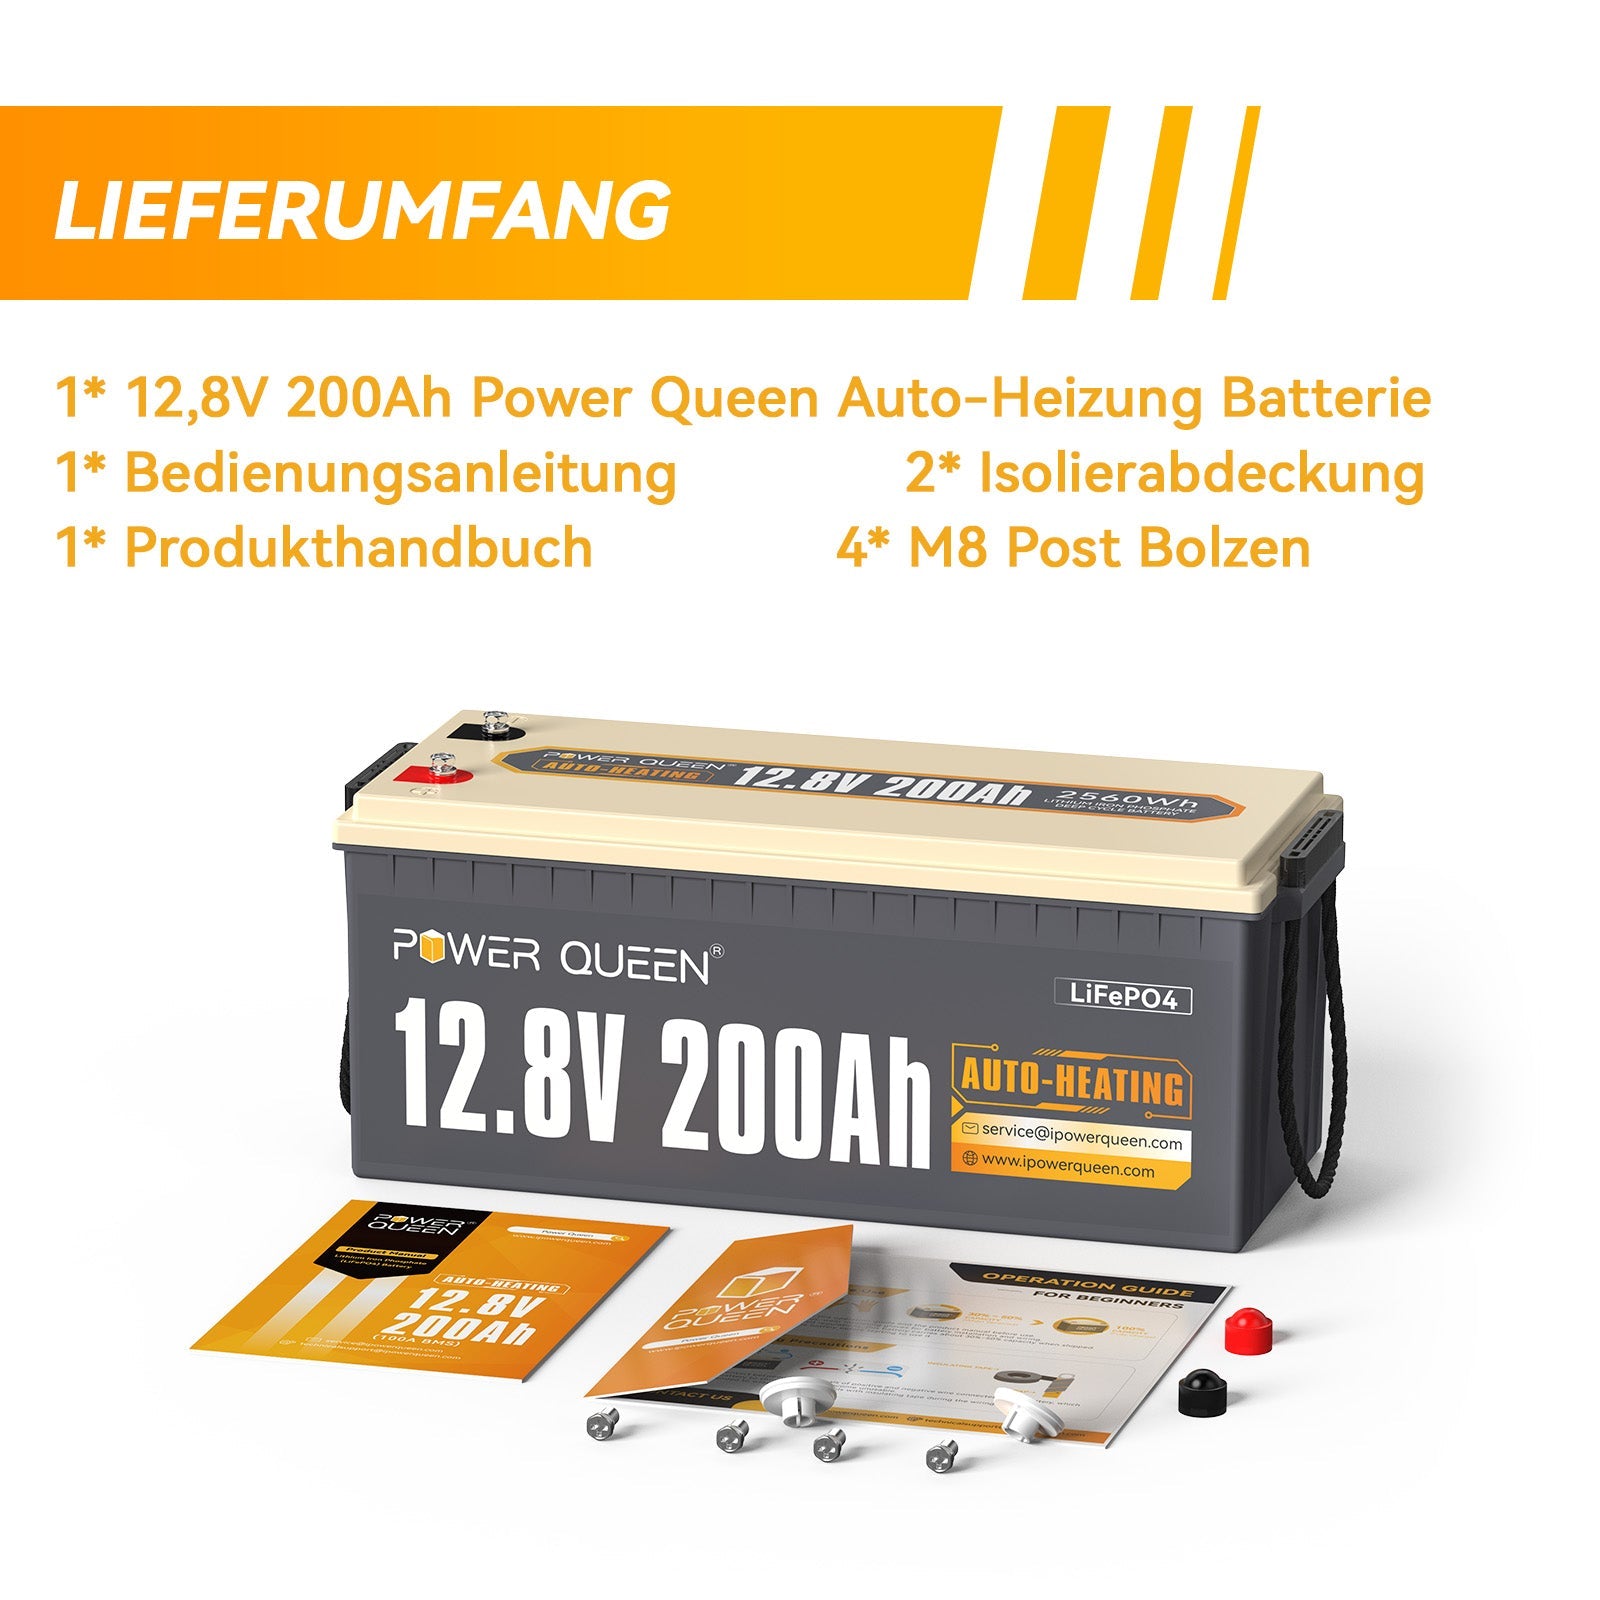 【Like New】Power Queen 12.8V 200Ah Self-Heating LiFePO4 Battery, Built-in 100A BMS